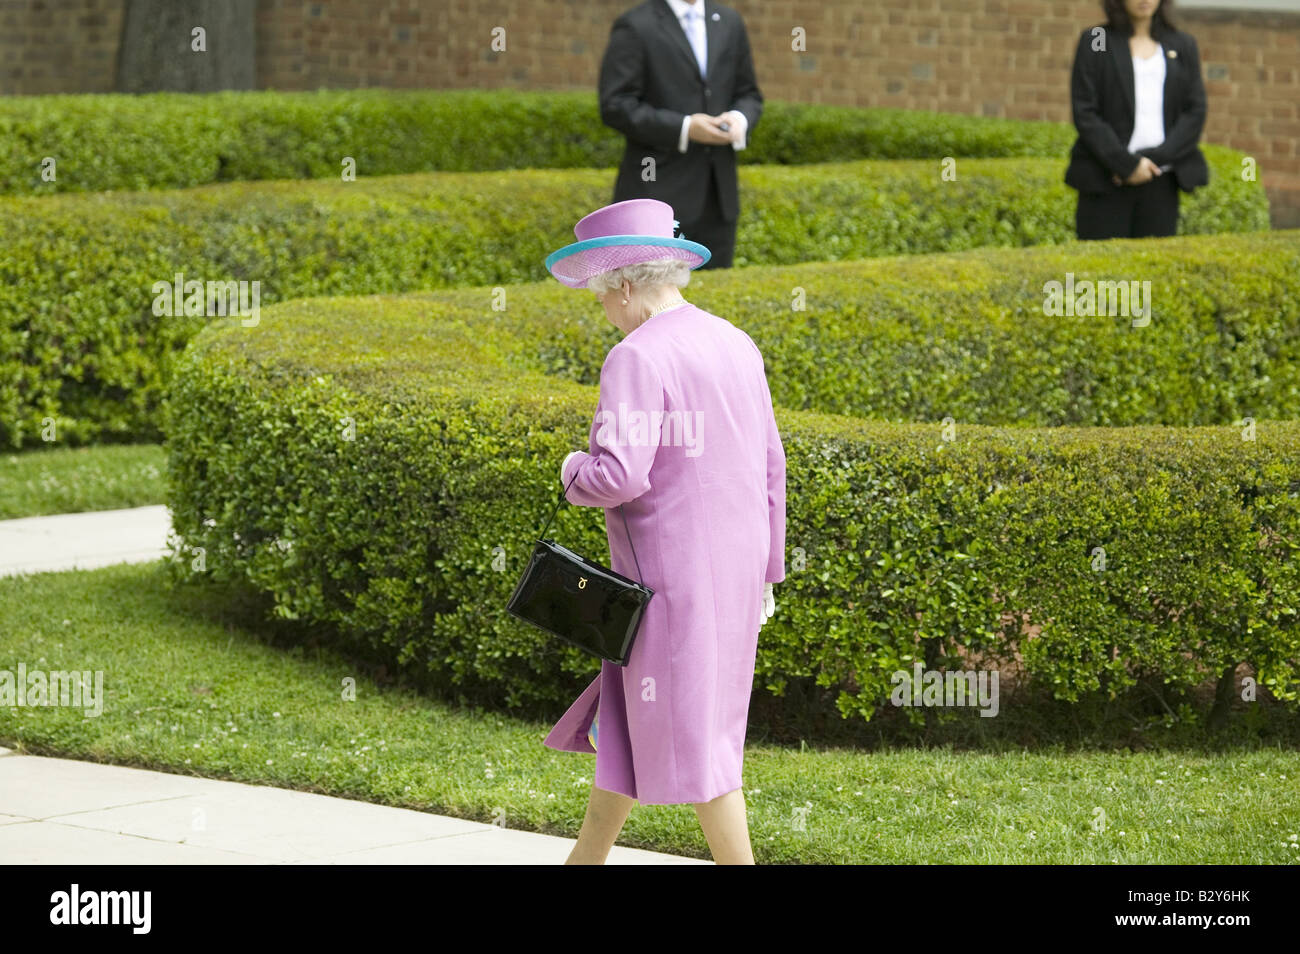 Queen Elizabeth II in bright purple outfit and black purse, walking to Governor's Palace in Williamsburg VA Stock Photo